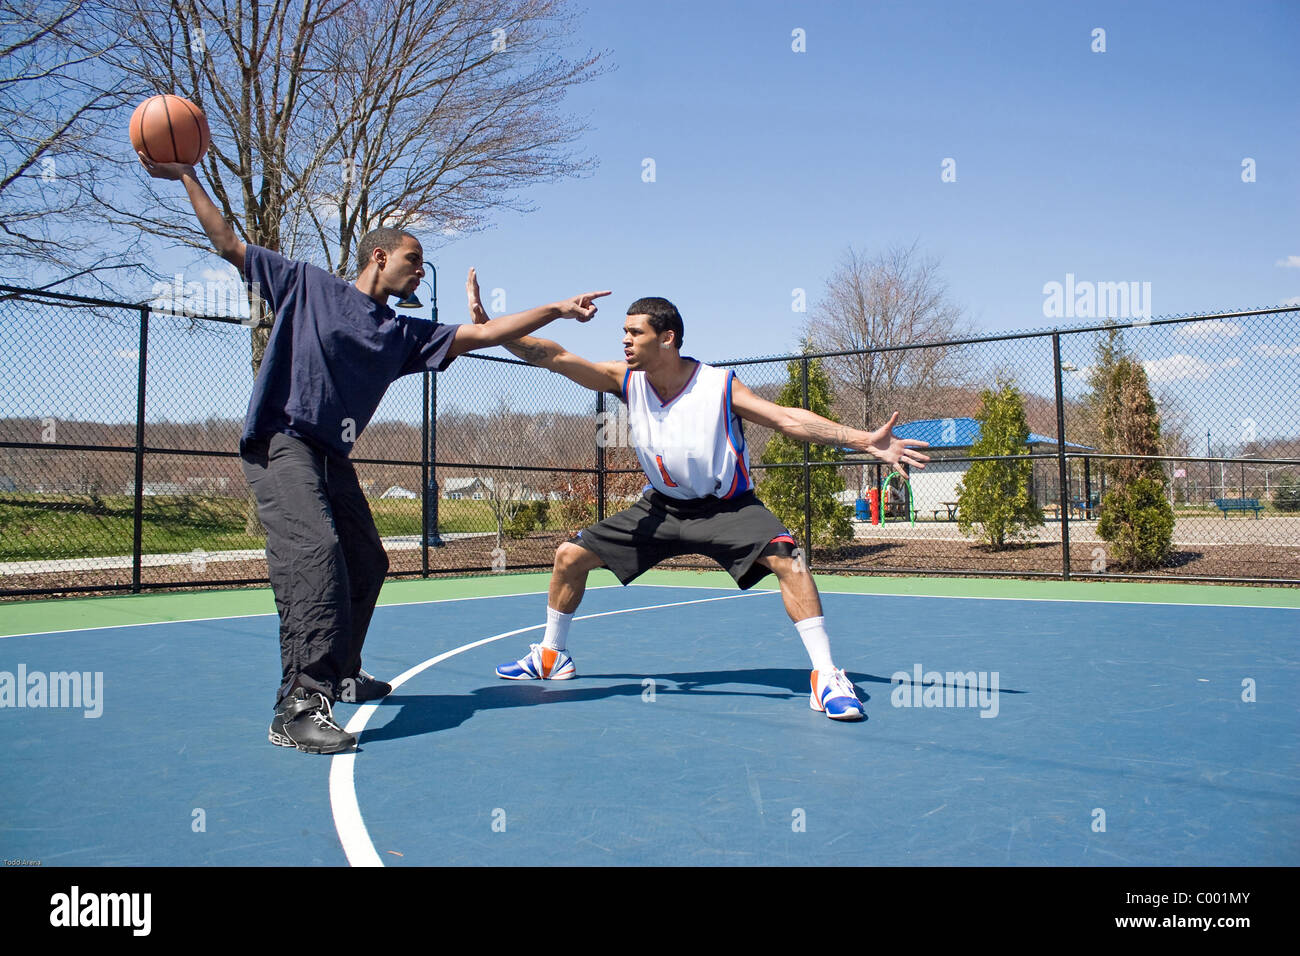 A young basketball player guarding his opponent during a one on one basketball game. Stock Photo